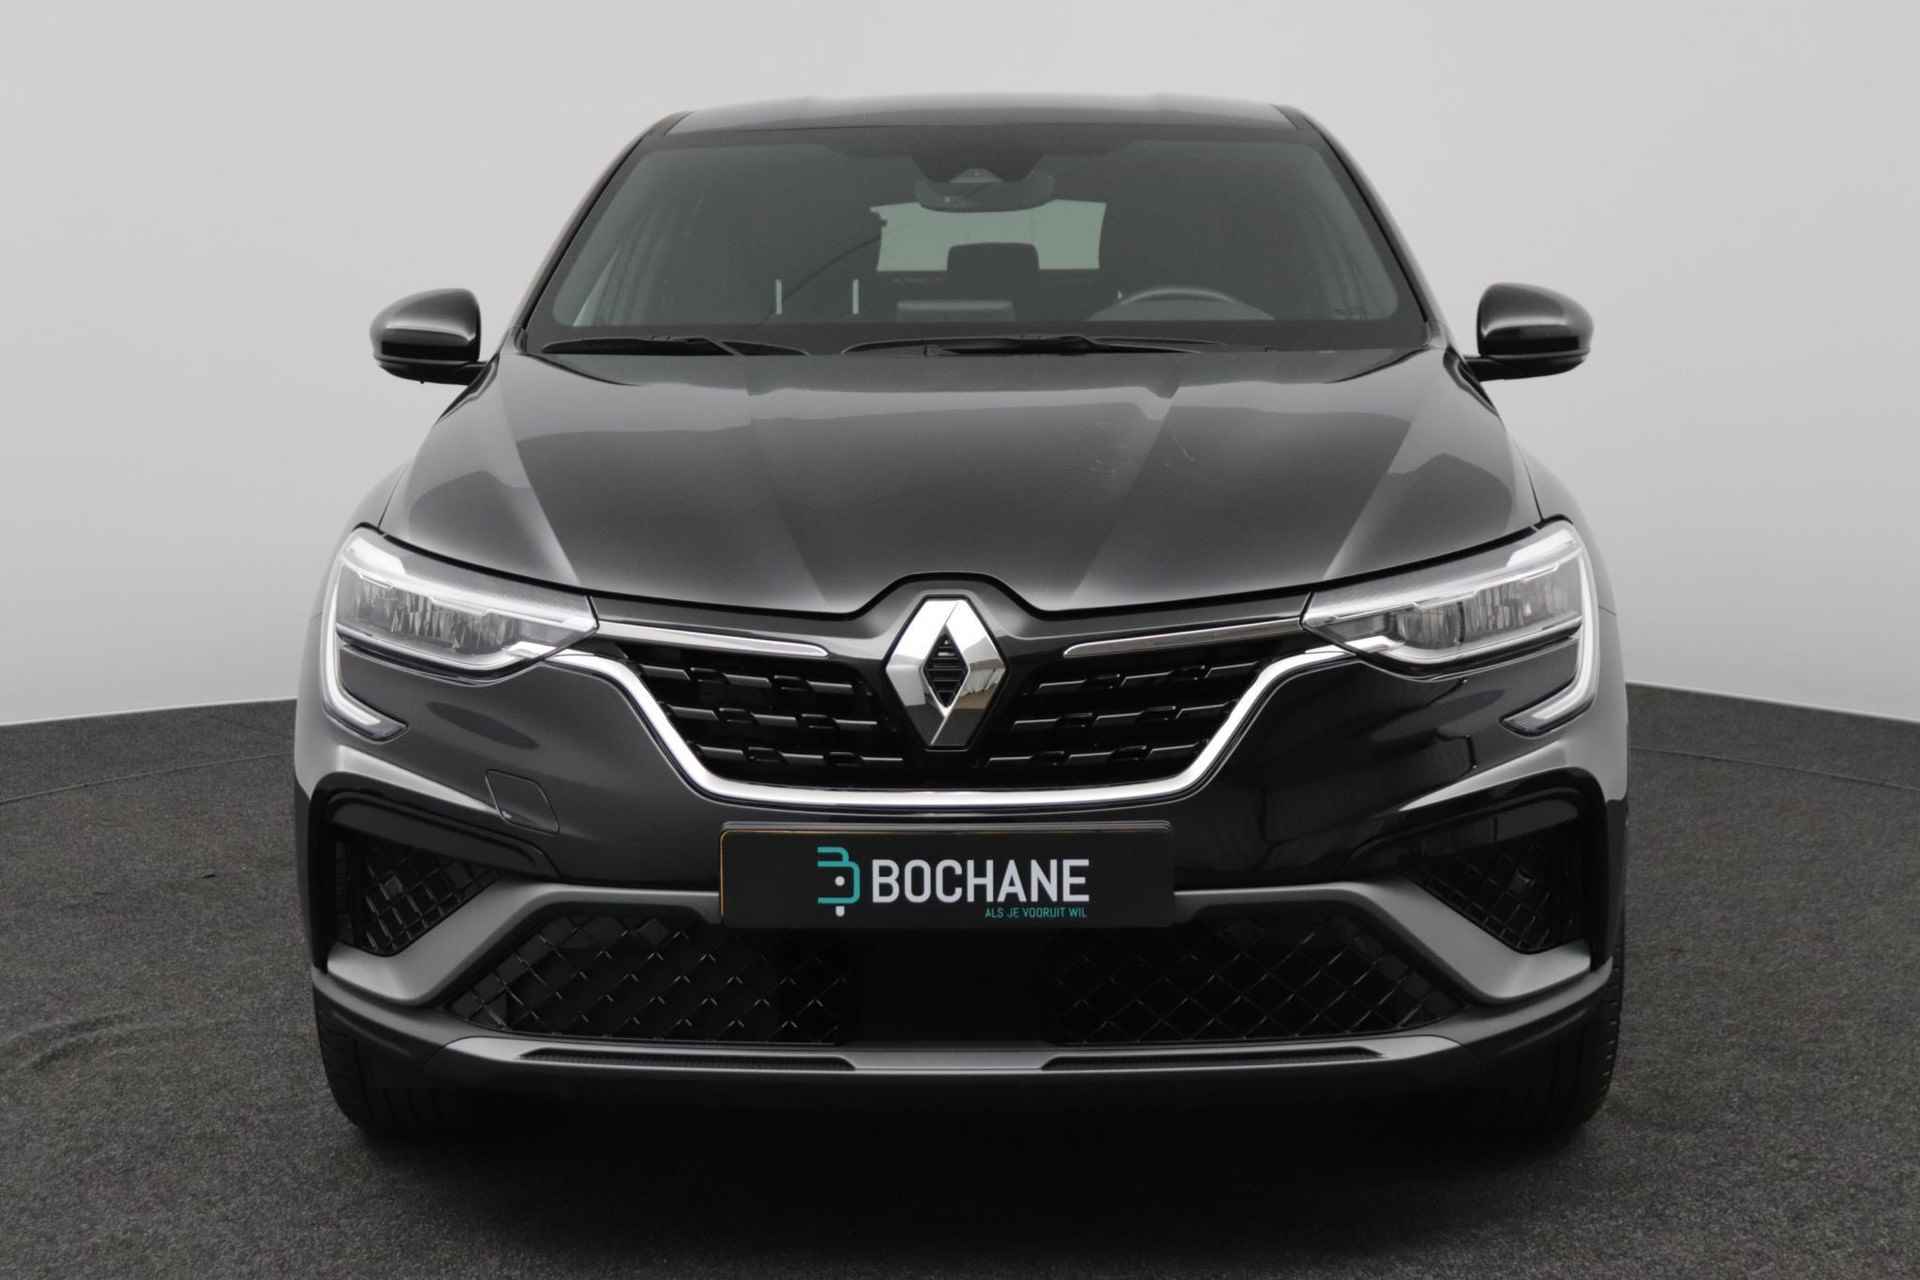 Renault Arkana 1.6 E-Tech Hybrid 145 R.S. Line Automaat / Cruise / Clima / Full LED / Navigatie / Camera / PDC / Bose Sound systeem - 4/33